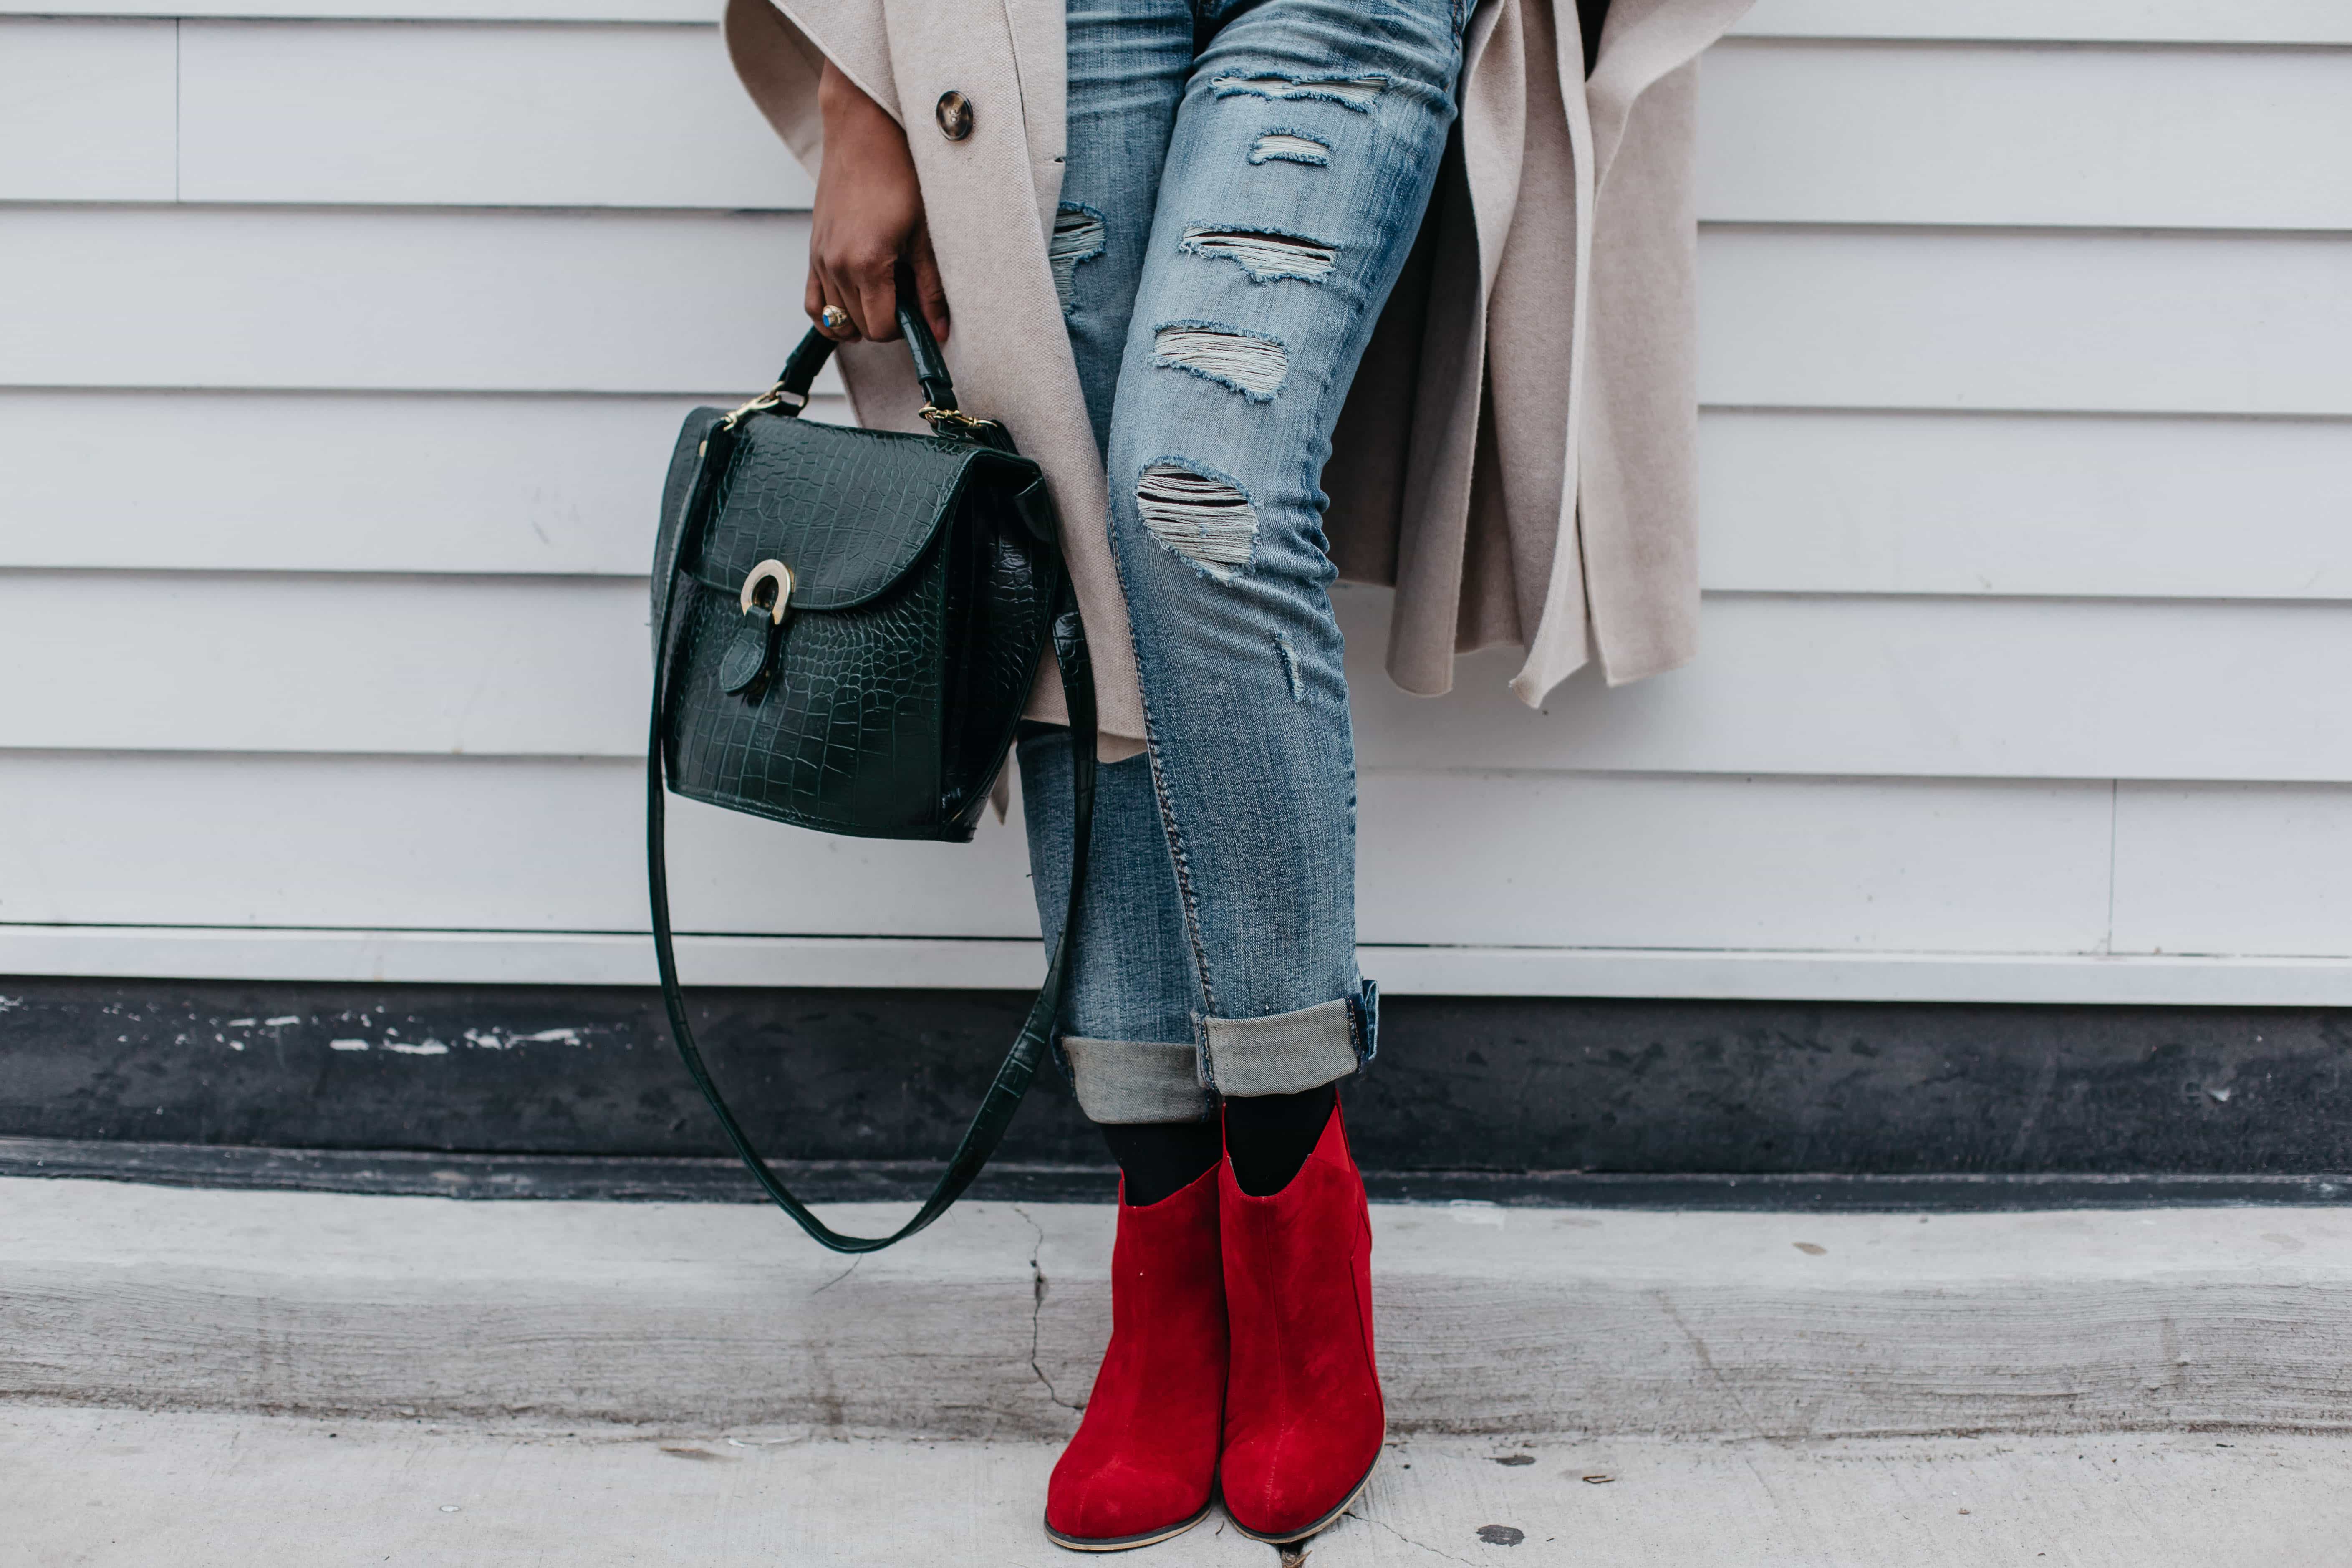 Red Booties